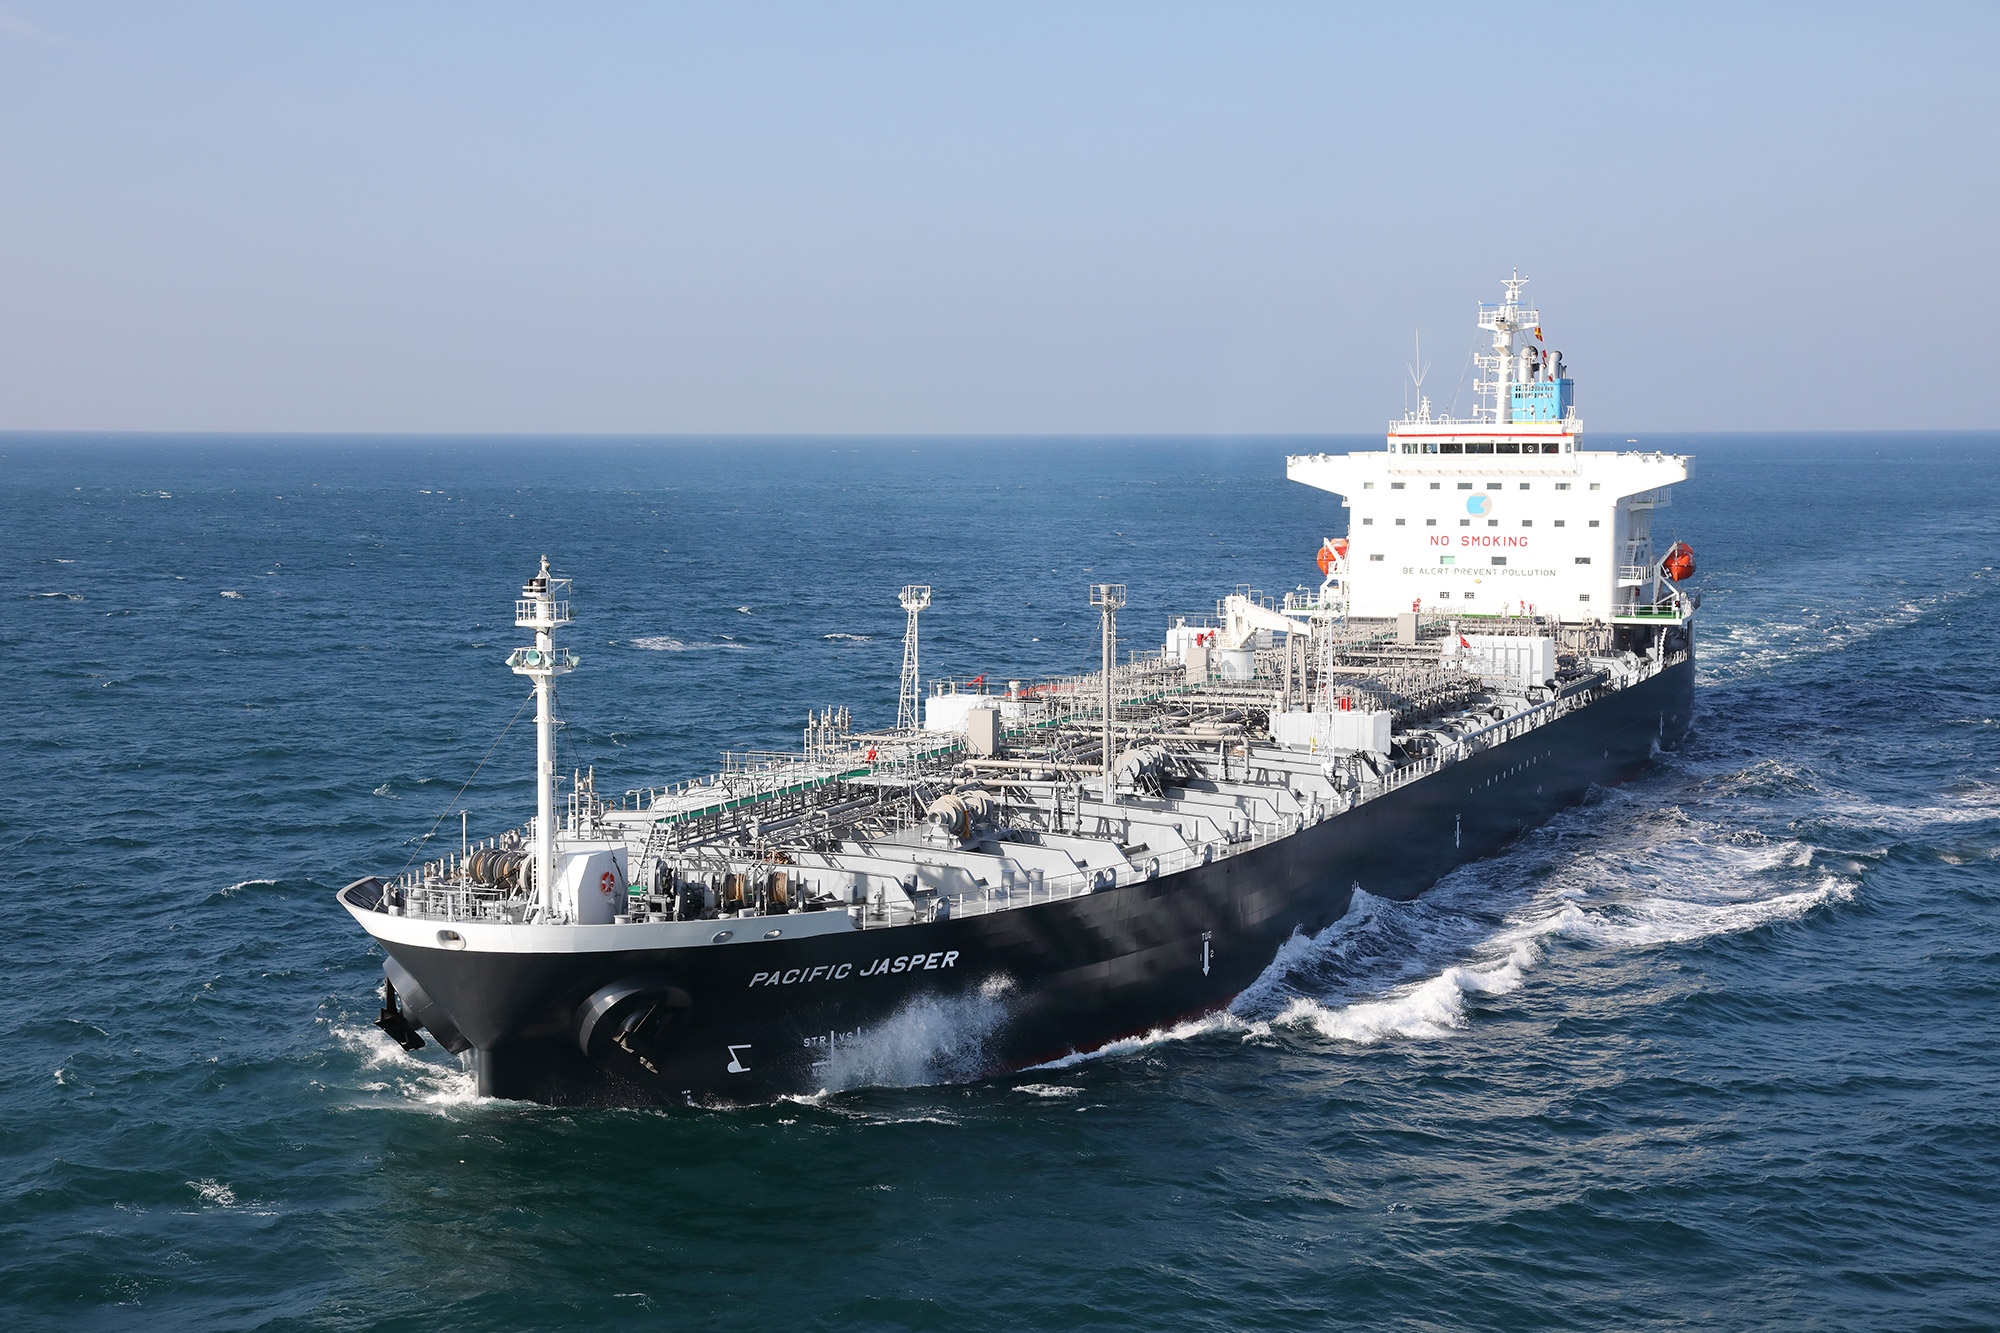 Eastern Pacific Shipping works on future fuels